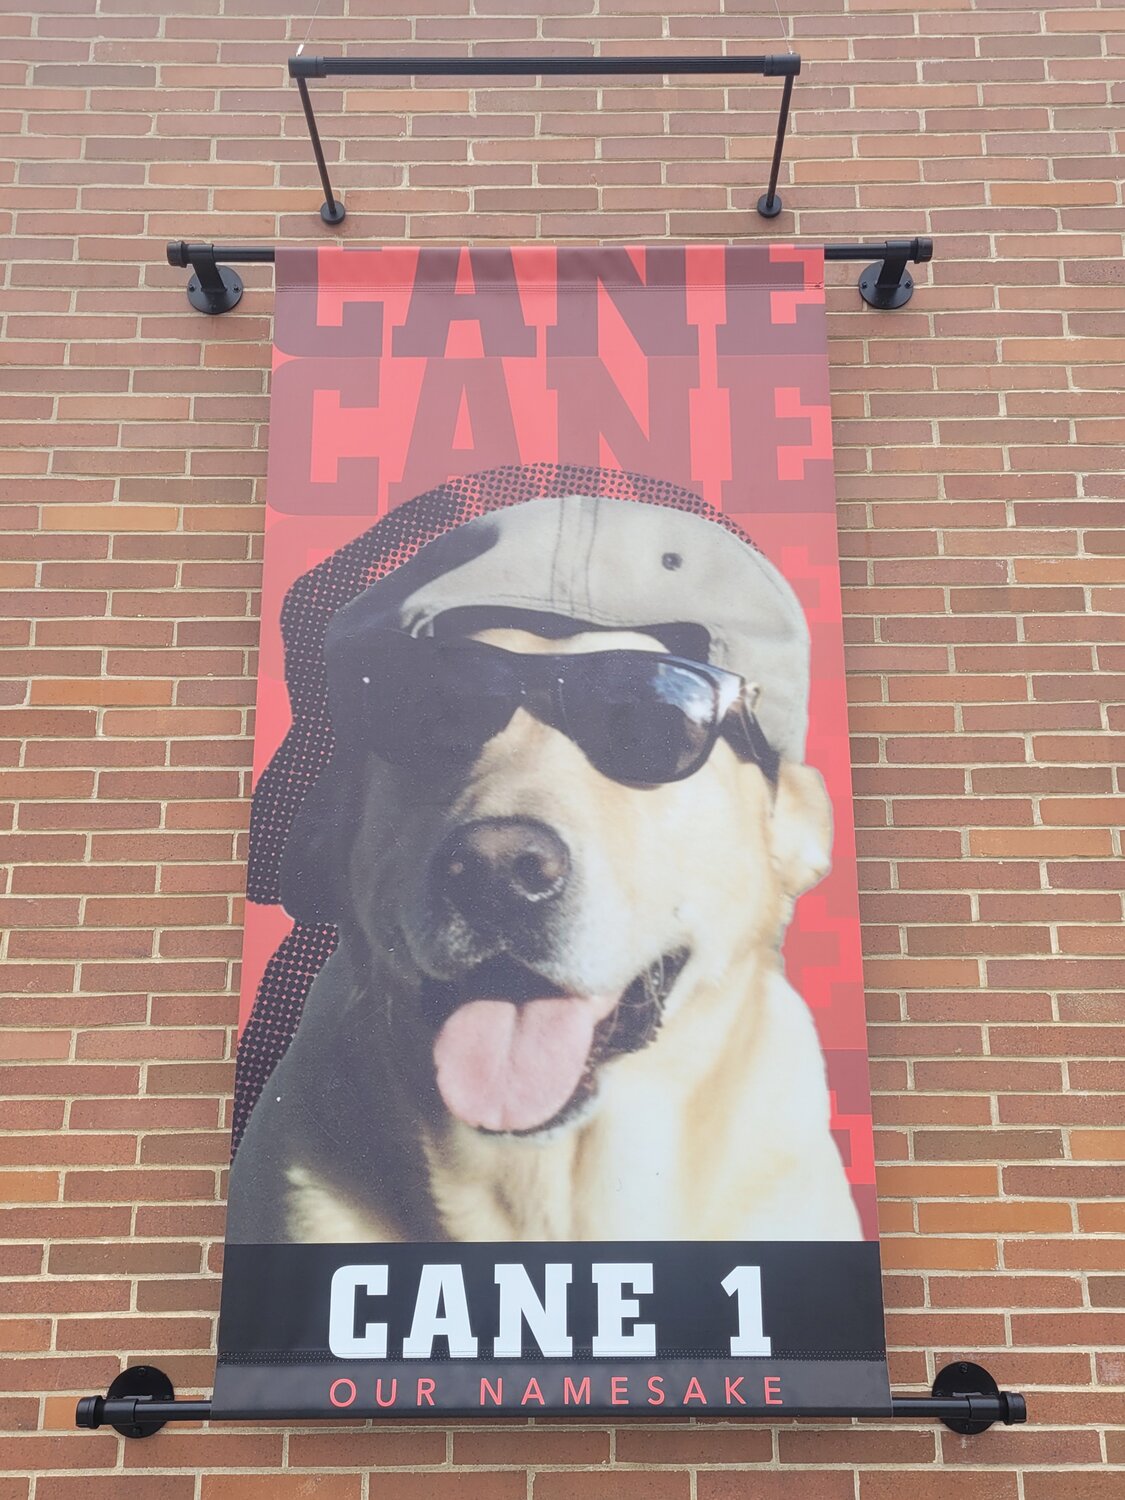 WATCH OUT ABEL: Raising Canes expects to open its new Johnston location in early January 2024. They’ve promised the first 20 guests “Free Canes for a Year.” Founder Todd Graves named his restaurant Raising Canes after his Labrador Retriever Raising Cane.